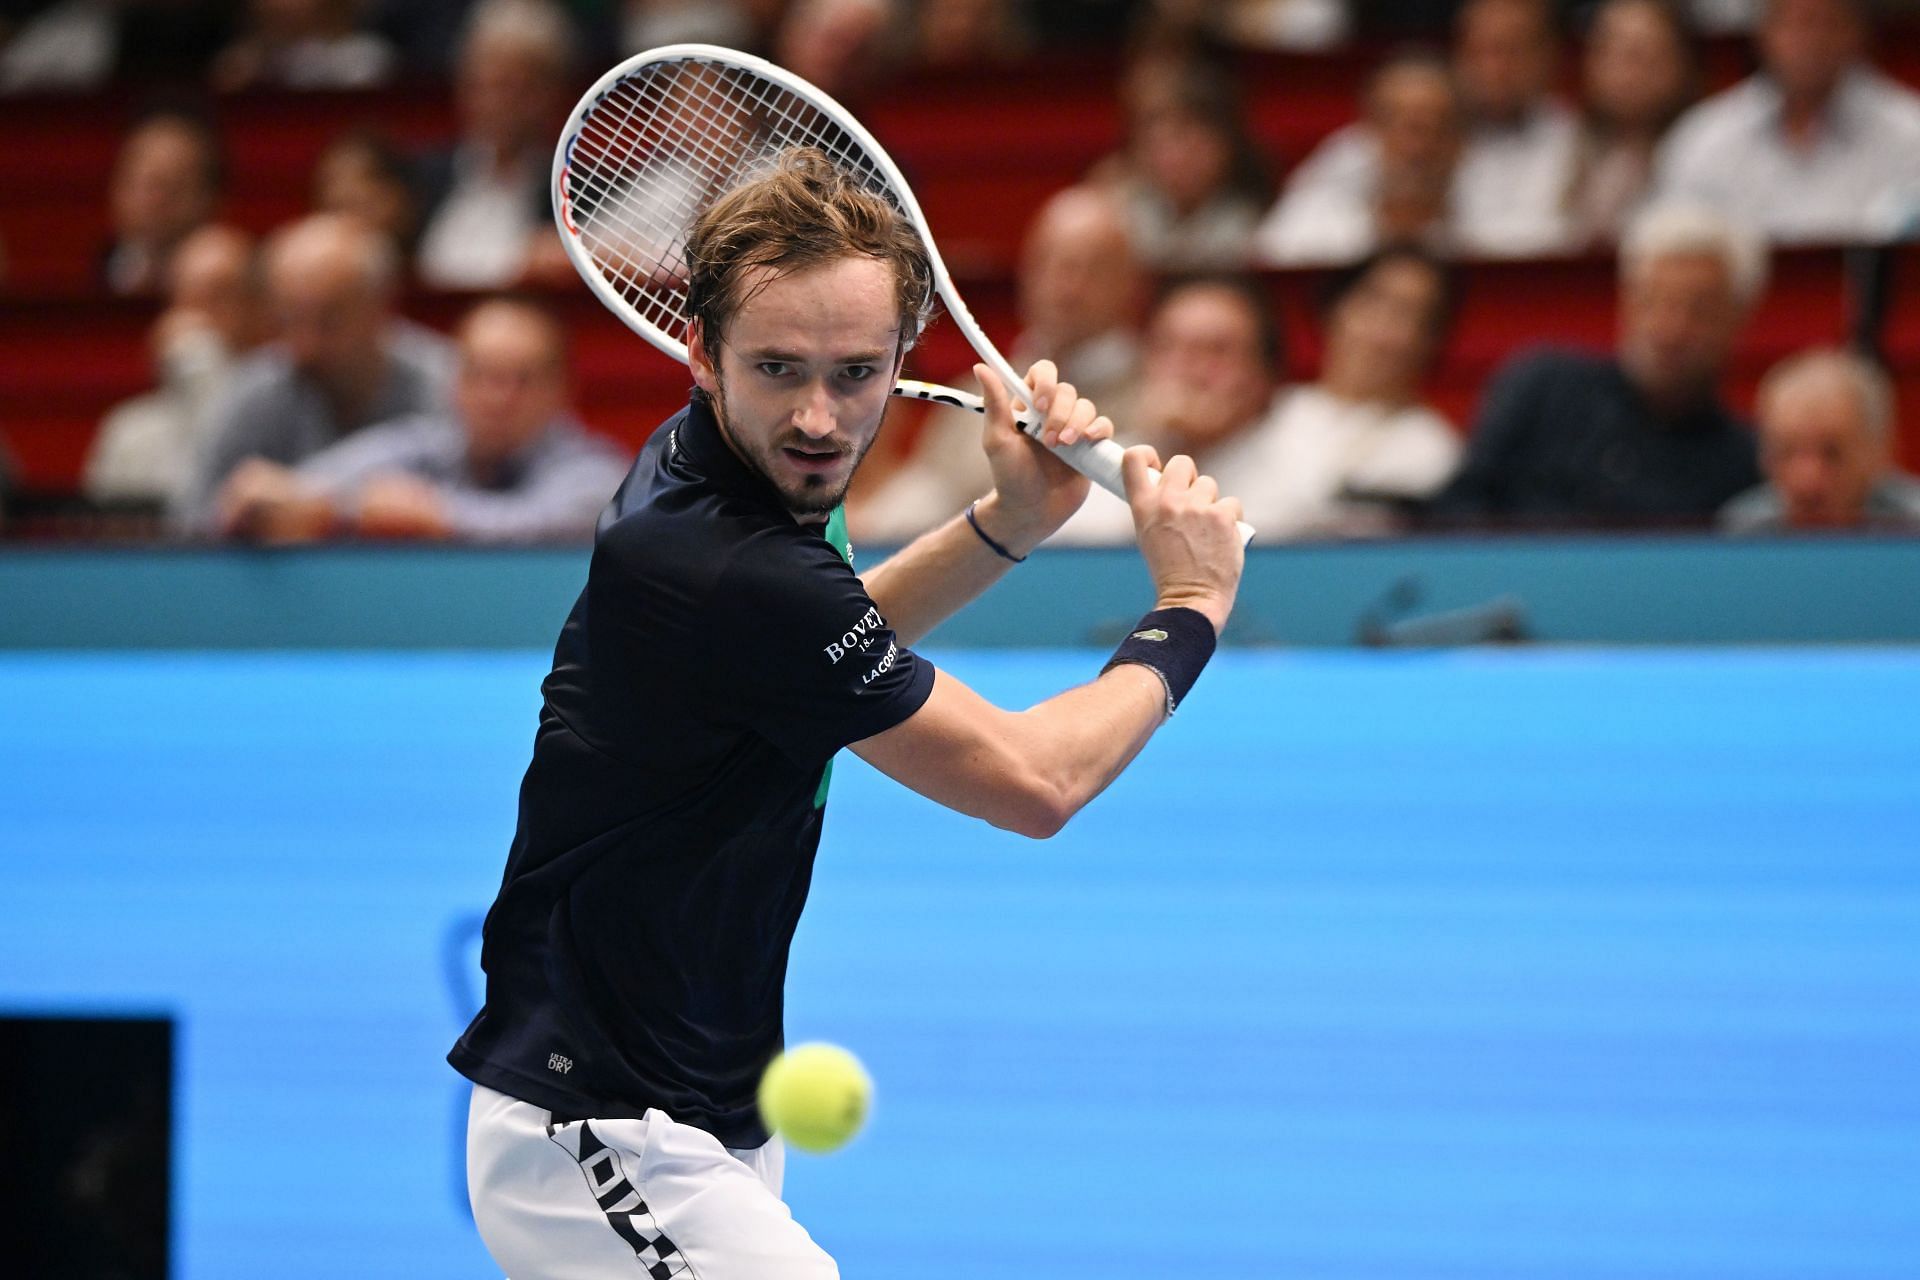 Daniil Medvedev will feature in the Paris Masters and the ATP Finals in Turin to cap off the 2022 season.